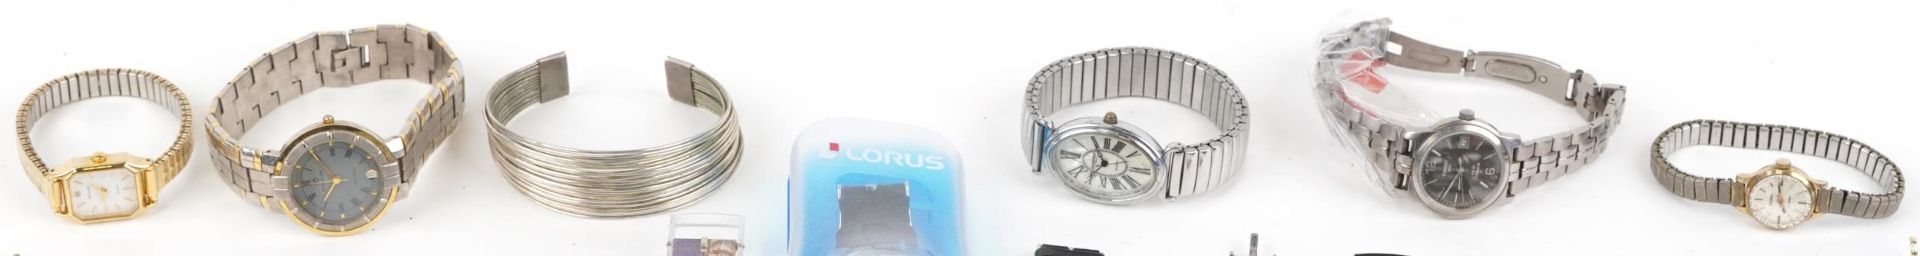 Vintage and later ladies and gentlemen's wristwatches and costume jewellery including Lorus, Swatch, - Image 2 of 4